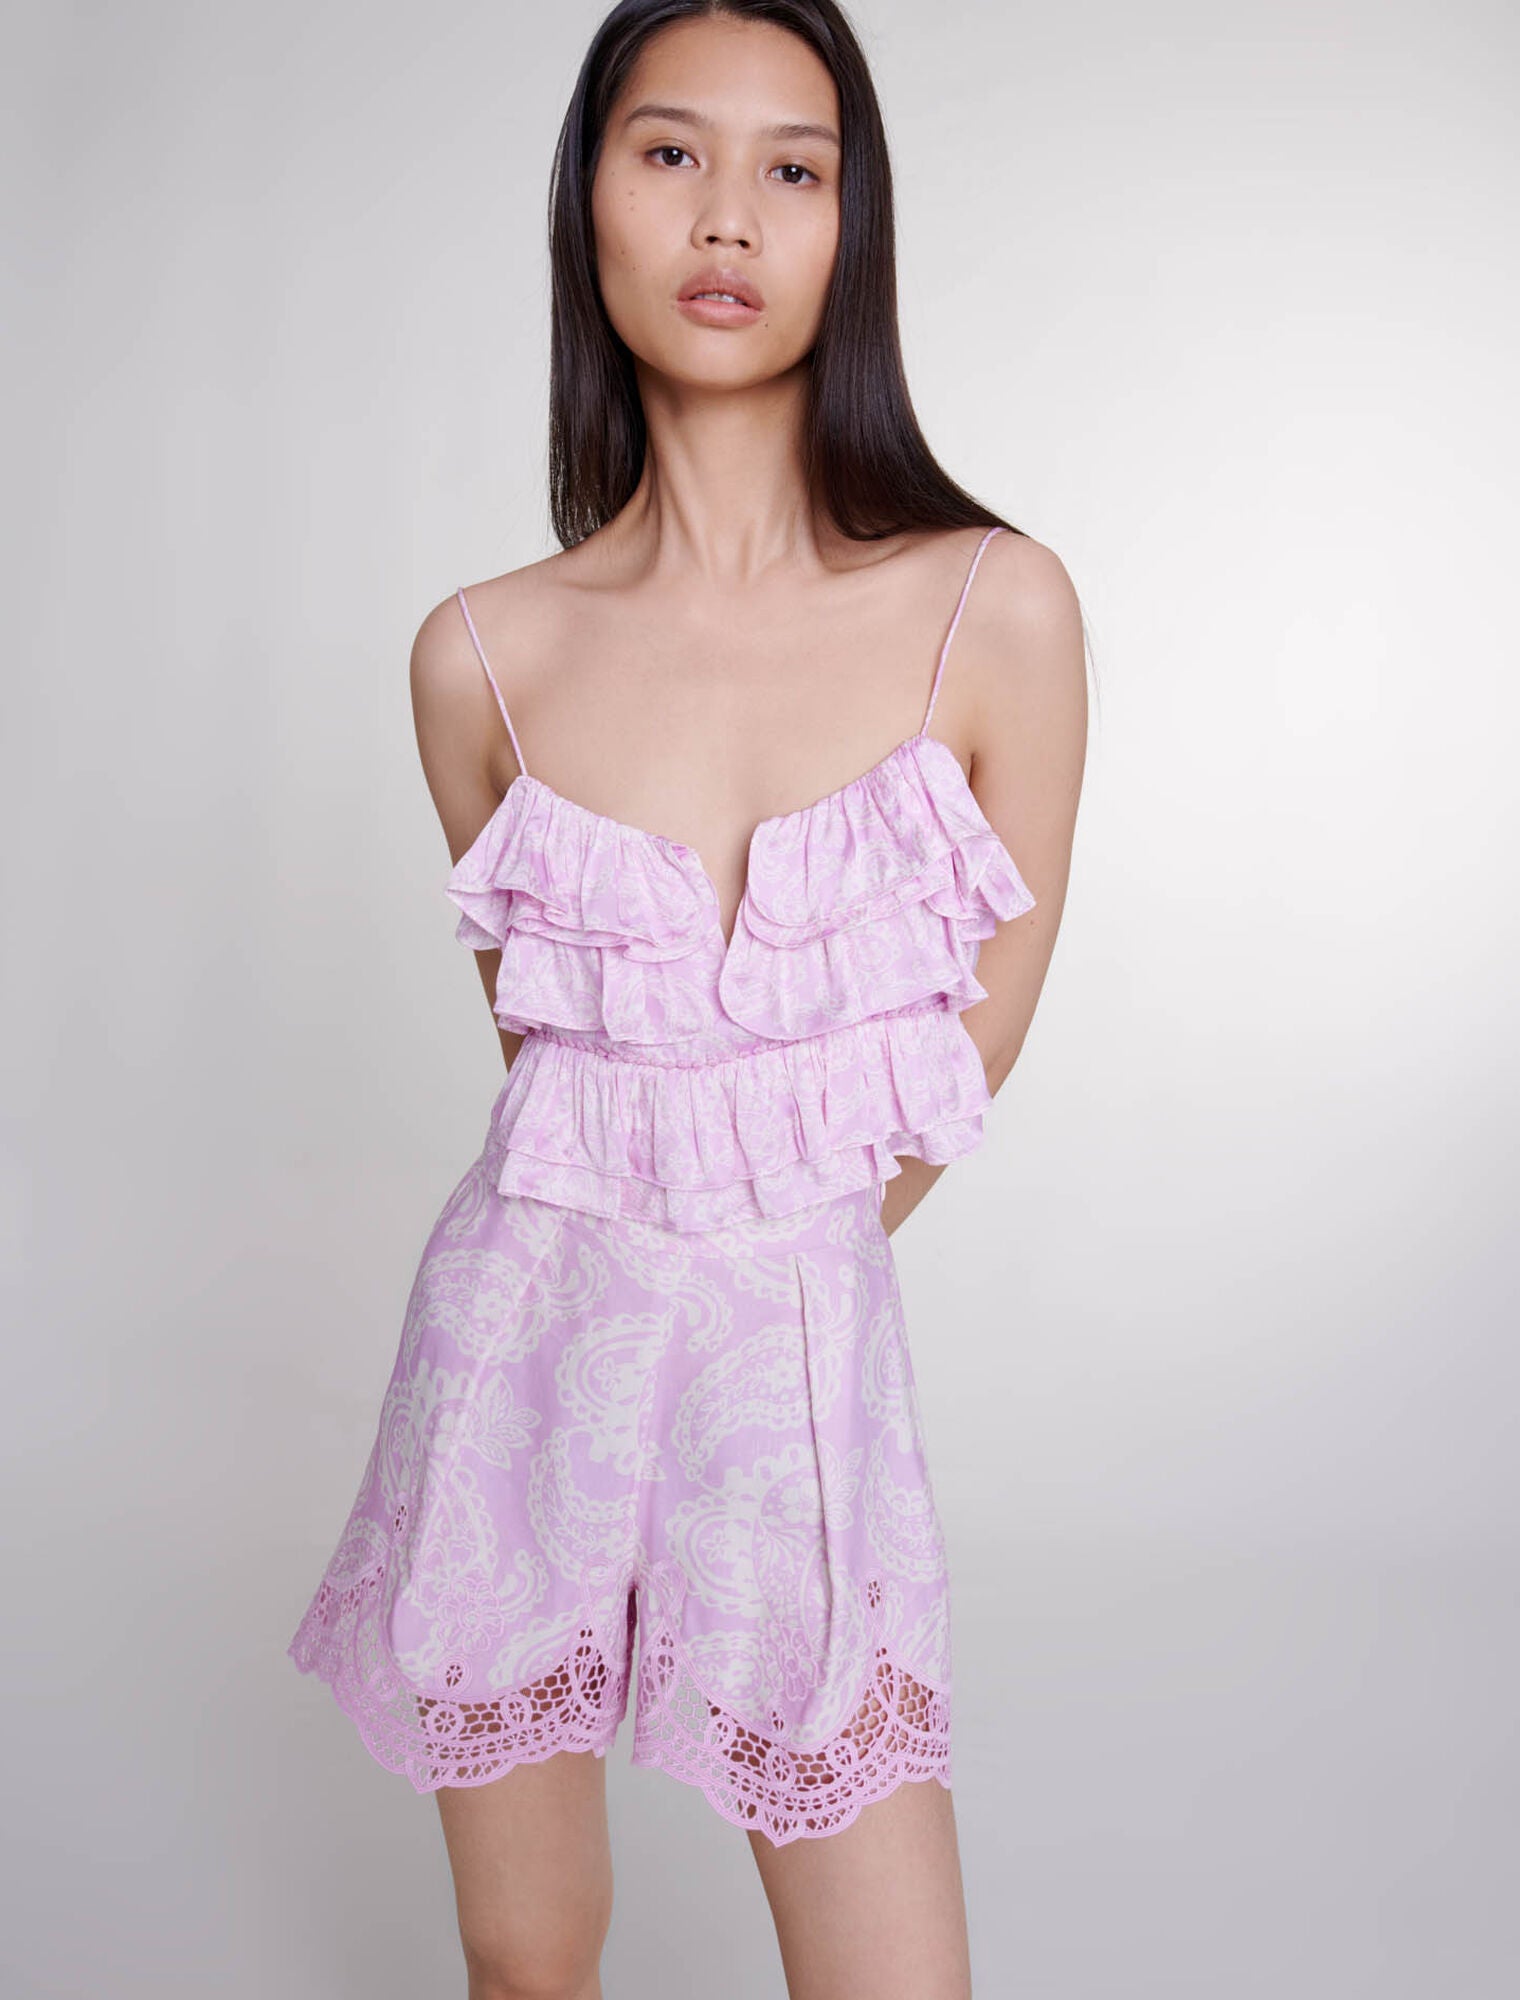 Pink Cashmere Print Patterned ruffled crop top